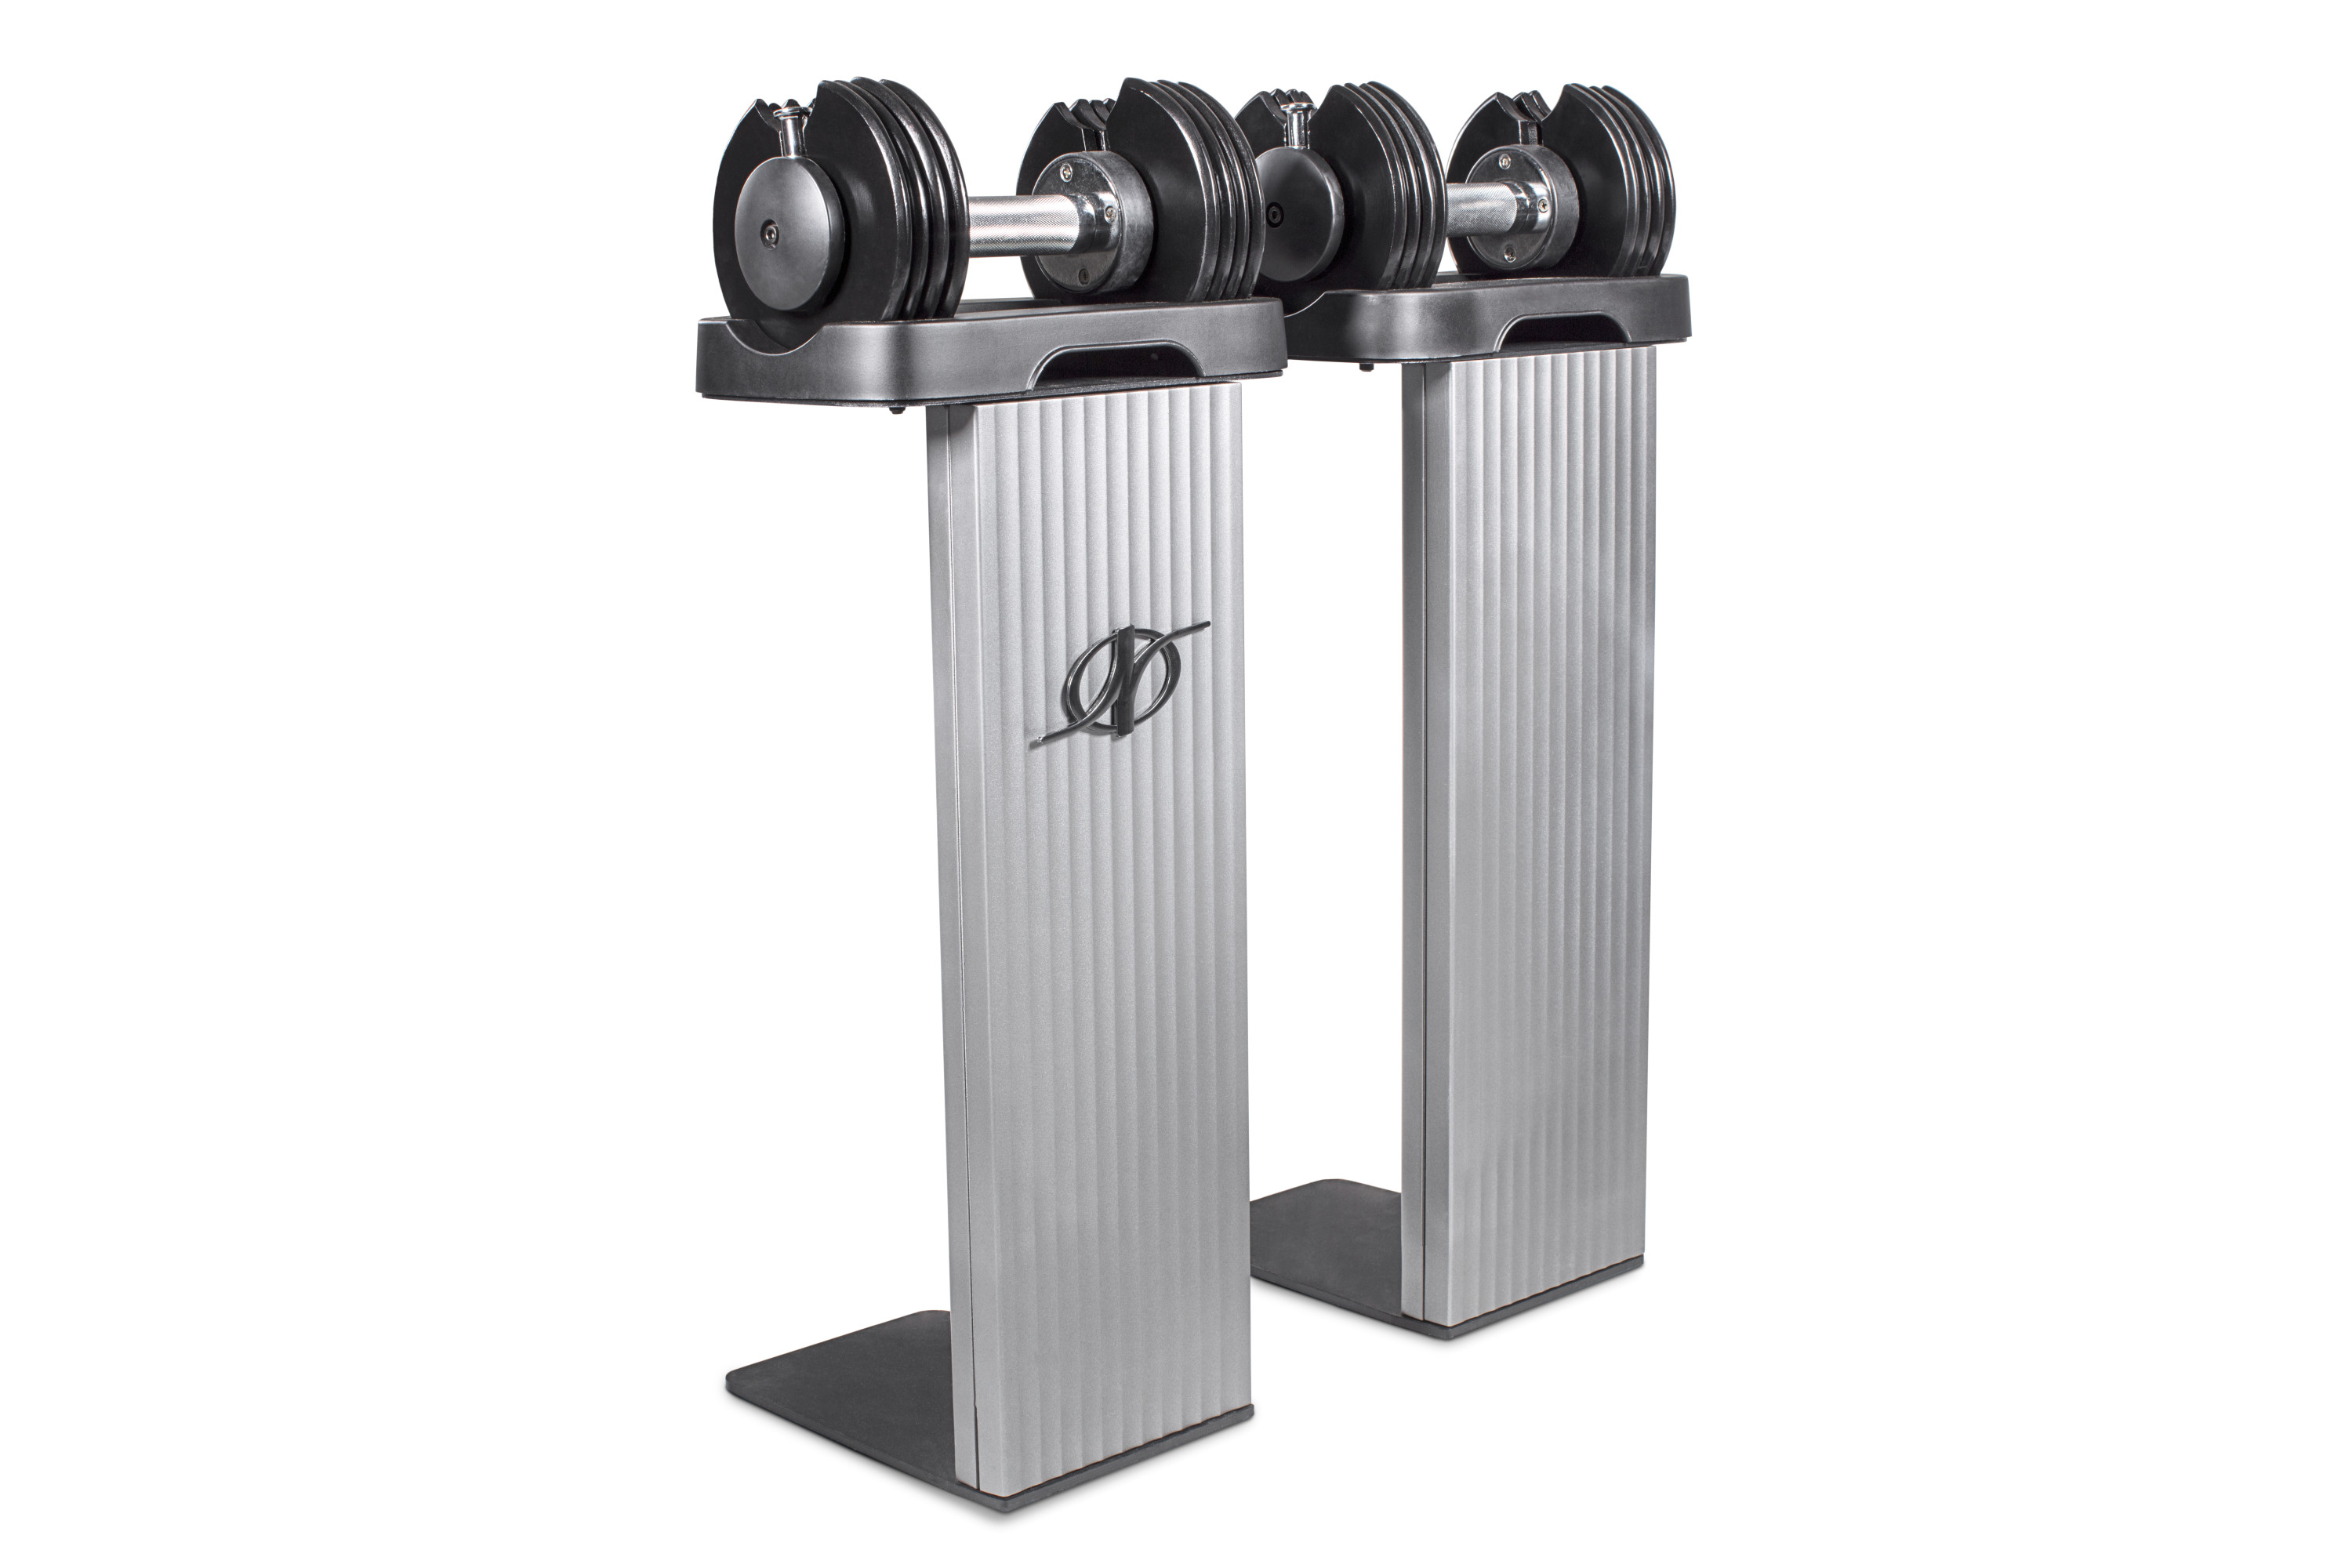 NordicTrack 12.5 lb. Adjustable Dumbbells with Weight Stands, Sold as Pair - image 2 of 10